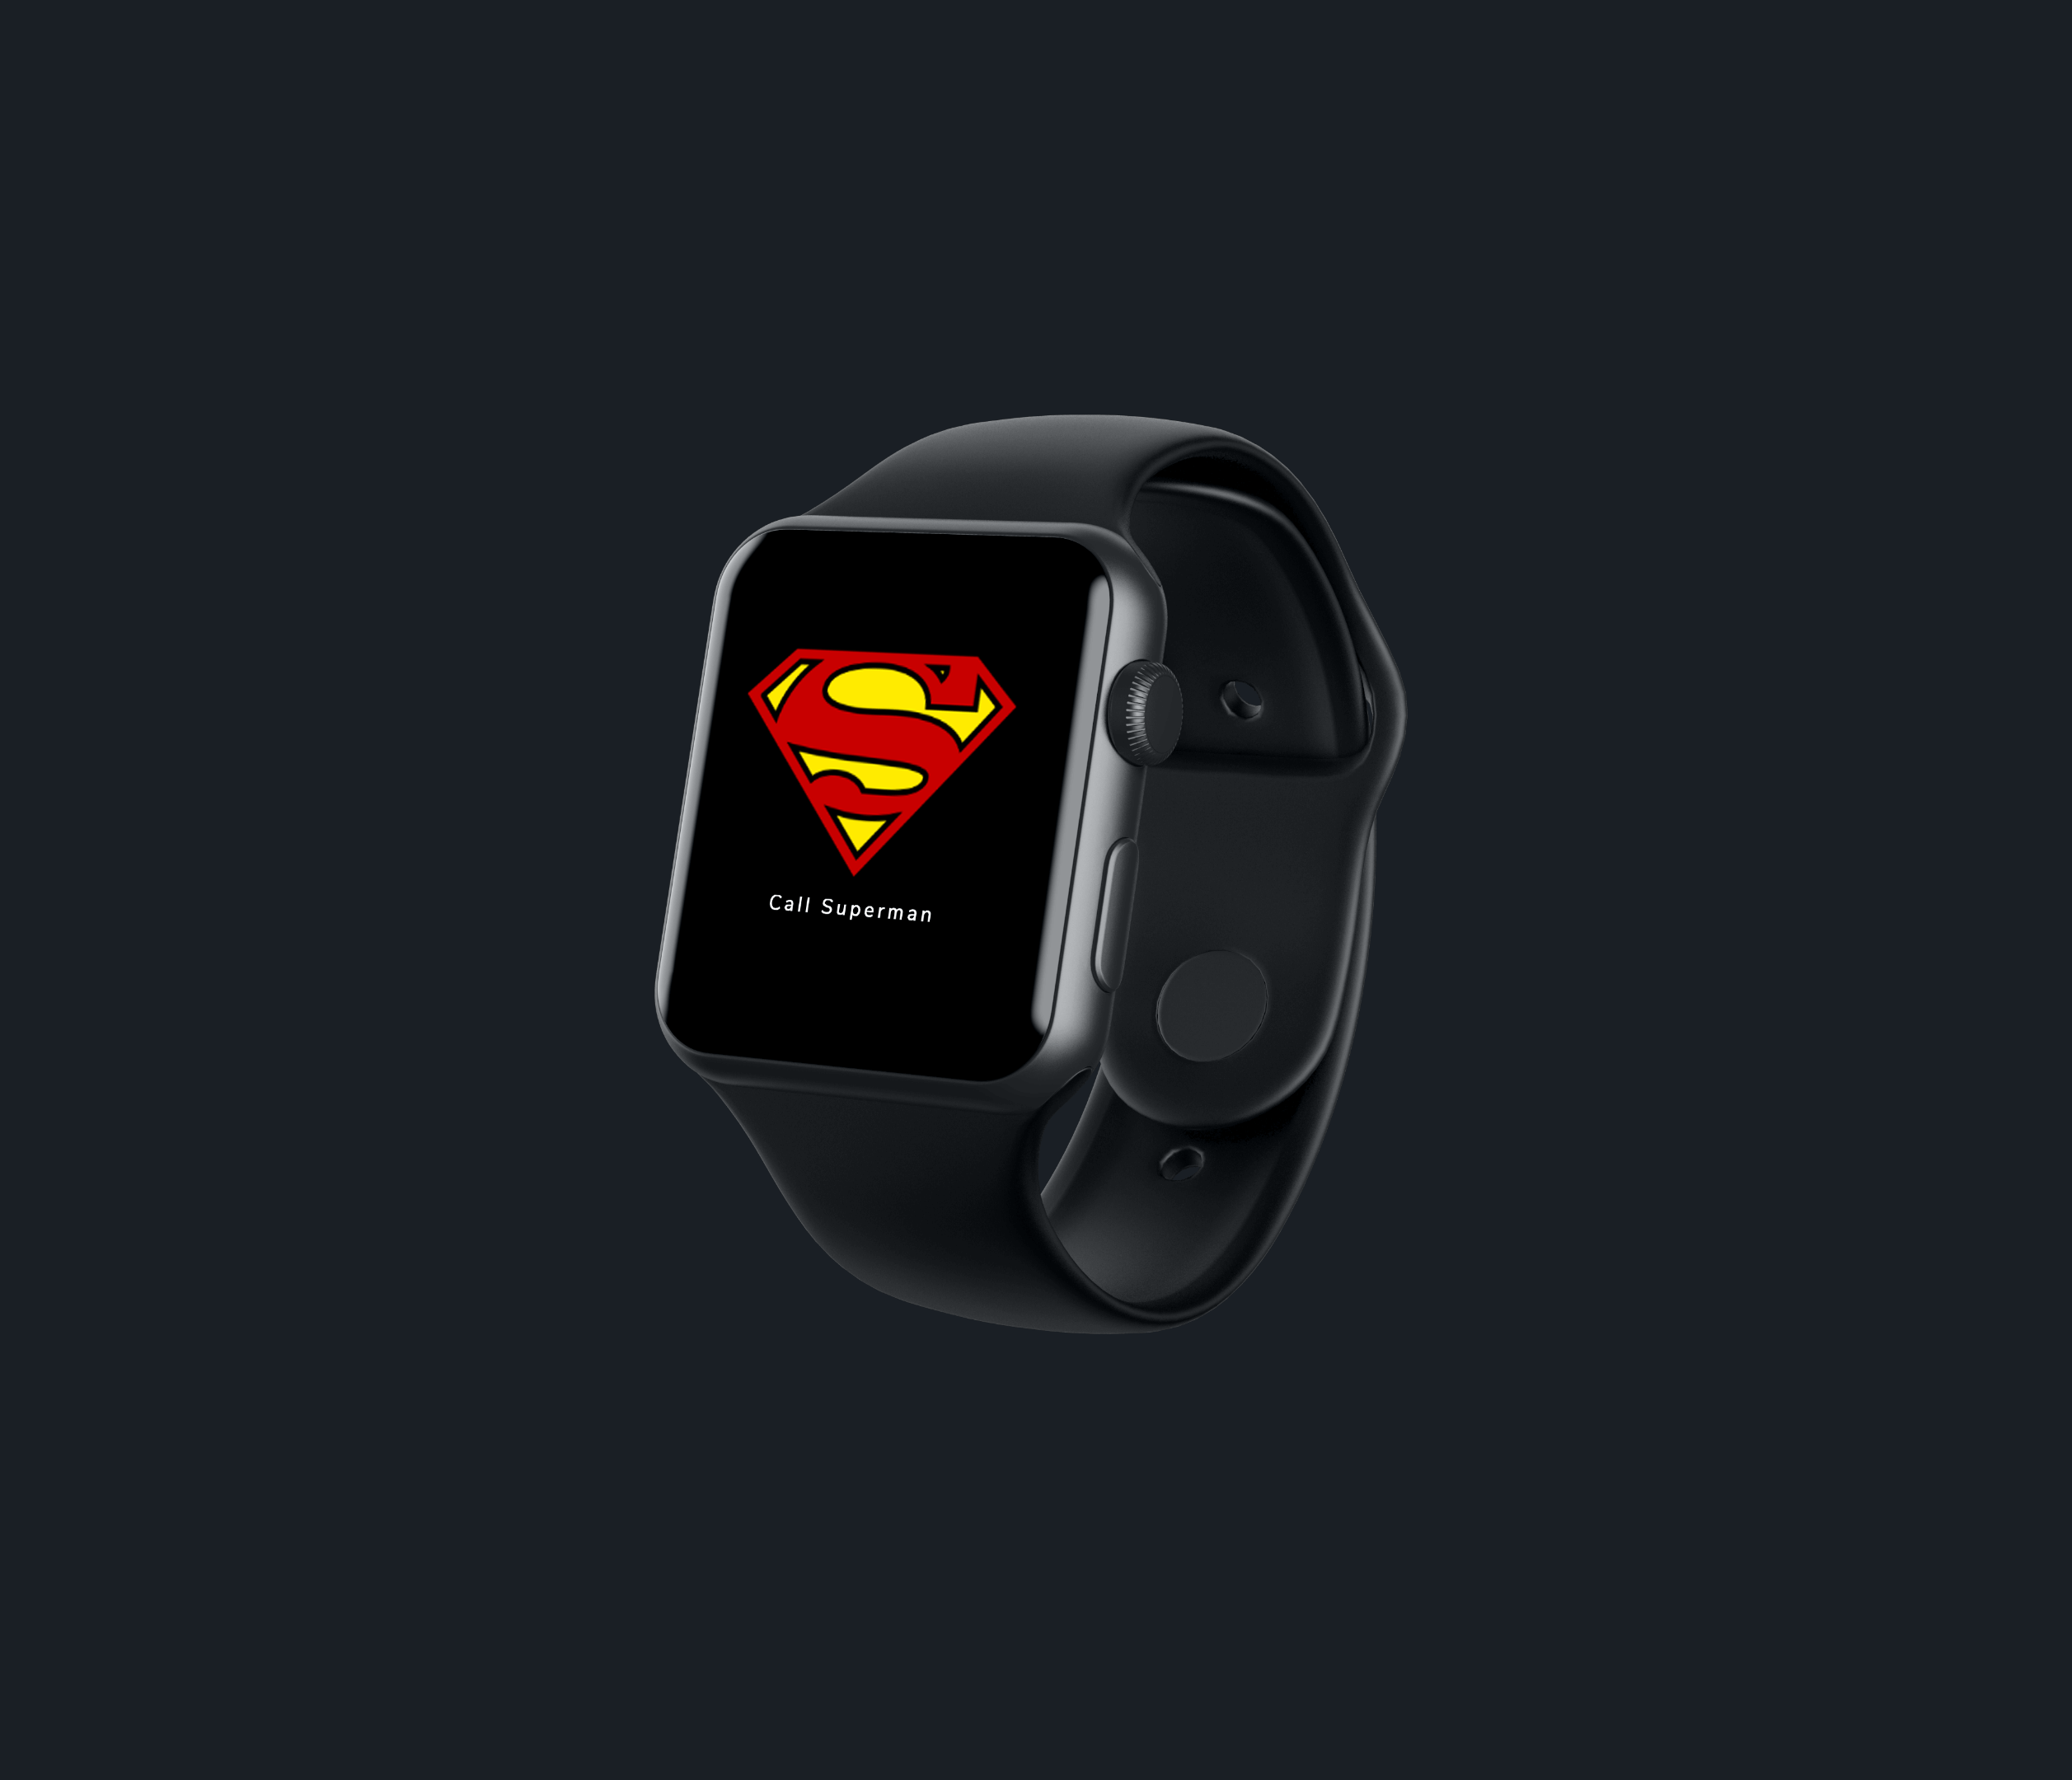 A joke solution in which Batman can use an Apple Watch to just call up Superman.